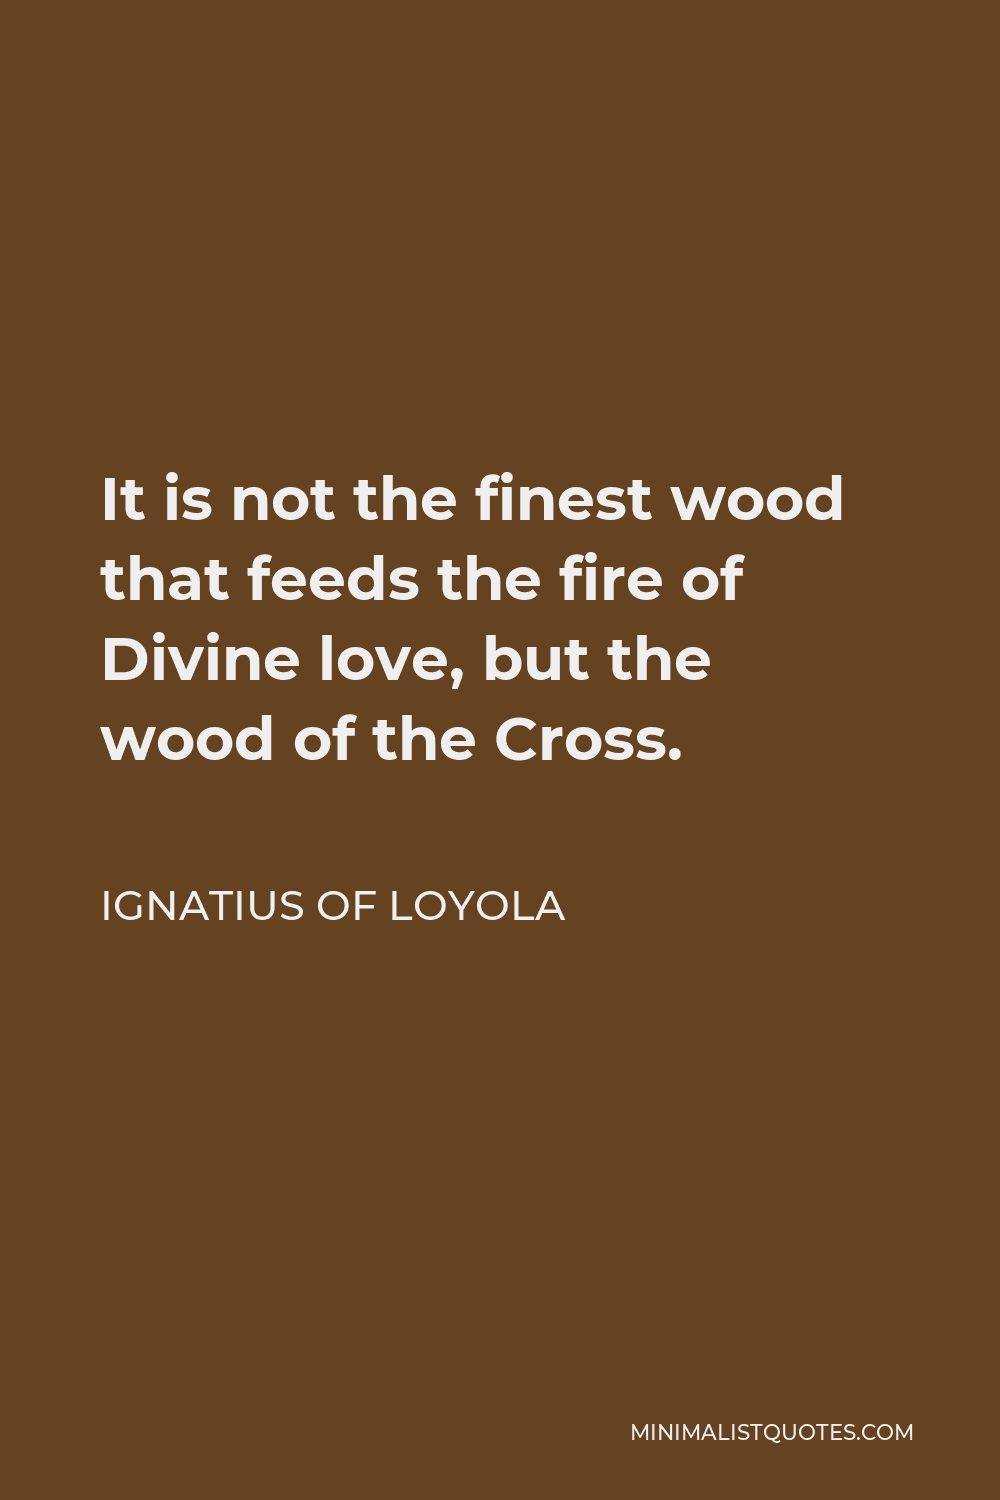 Ignatius of Loyola Quote - It is not the finest wood that feeds the fire of Divine love, but the wood of the Cross.